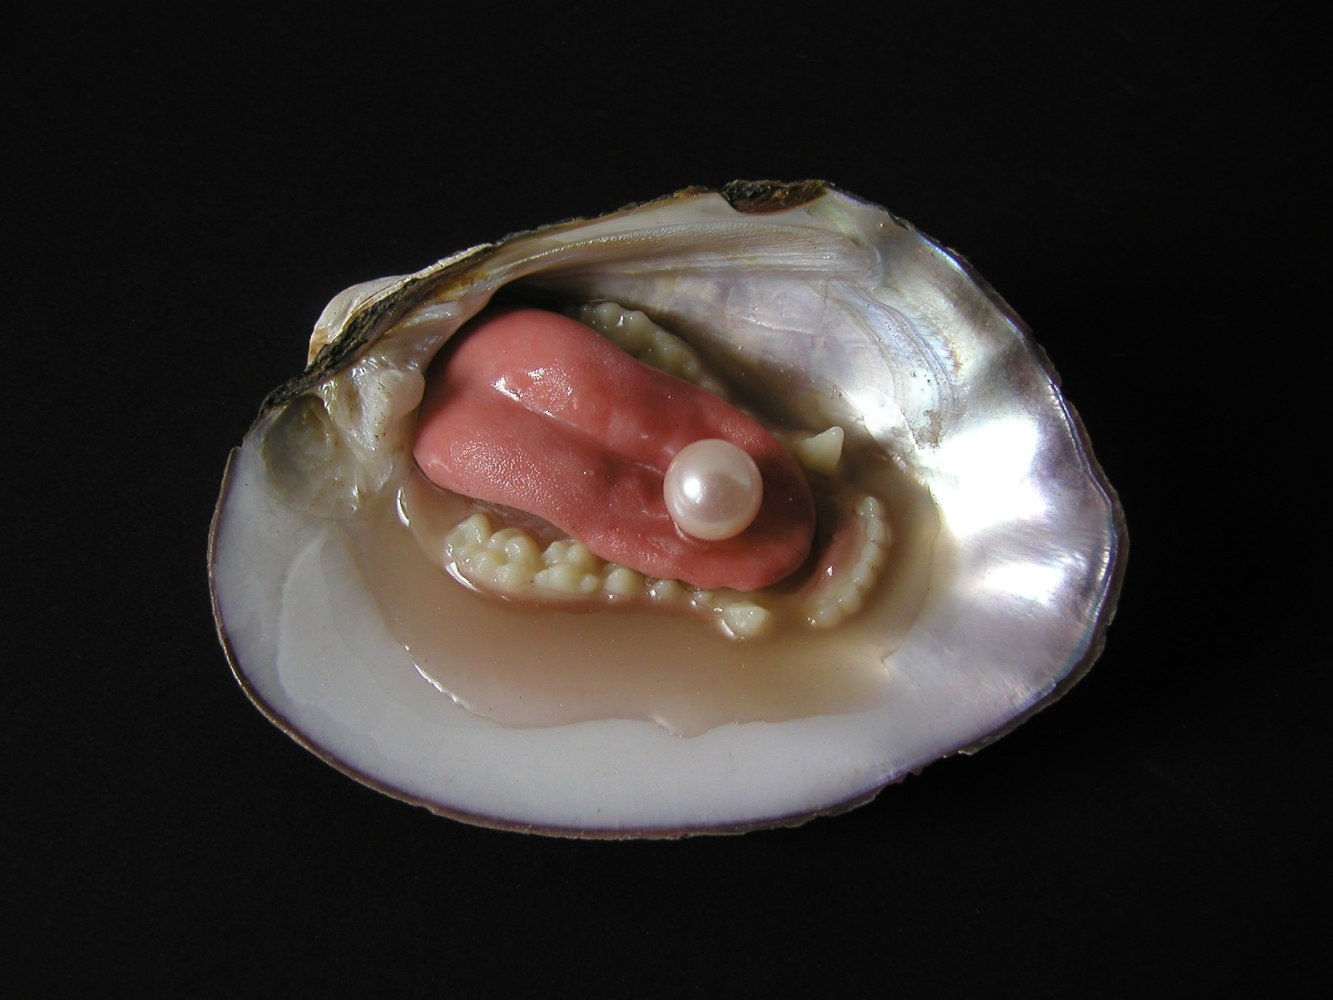 Untitled, 2005, Abalone, raccoon jaw and tongue with mother of pearl and resin.